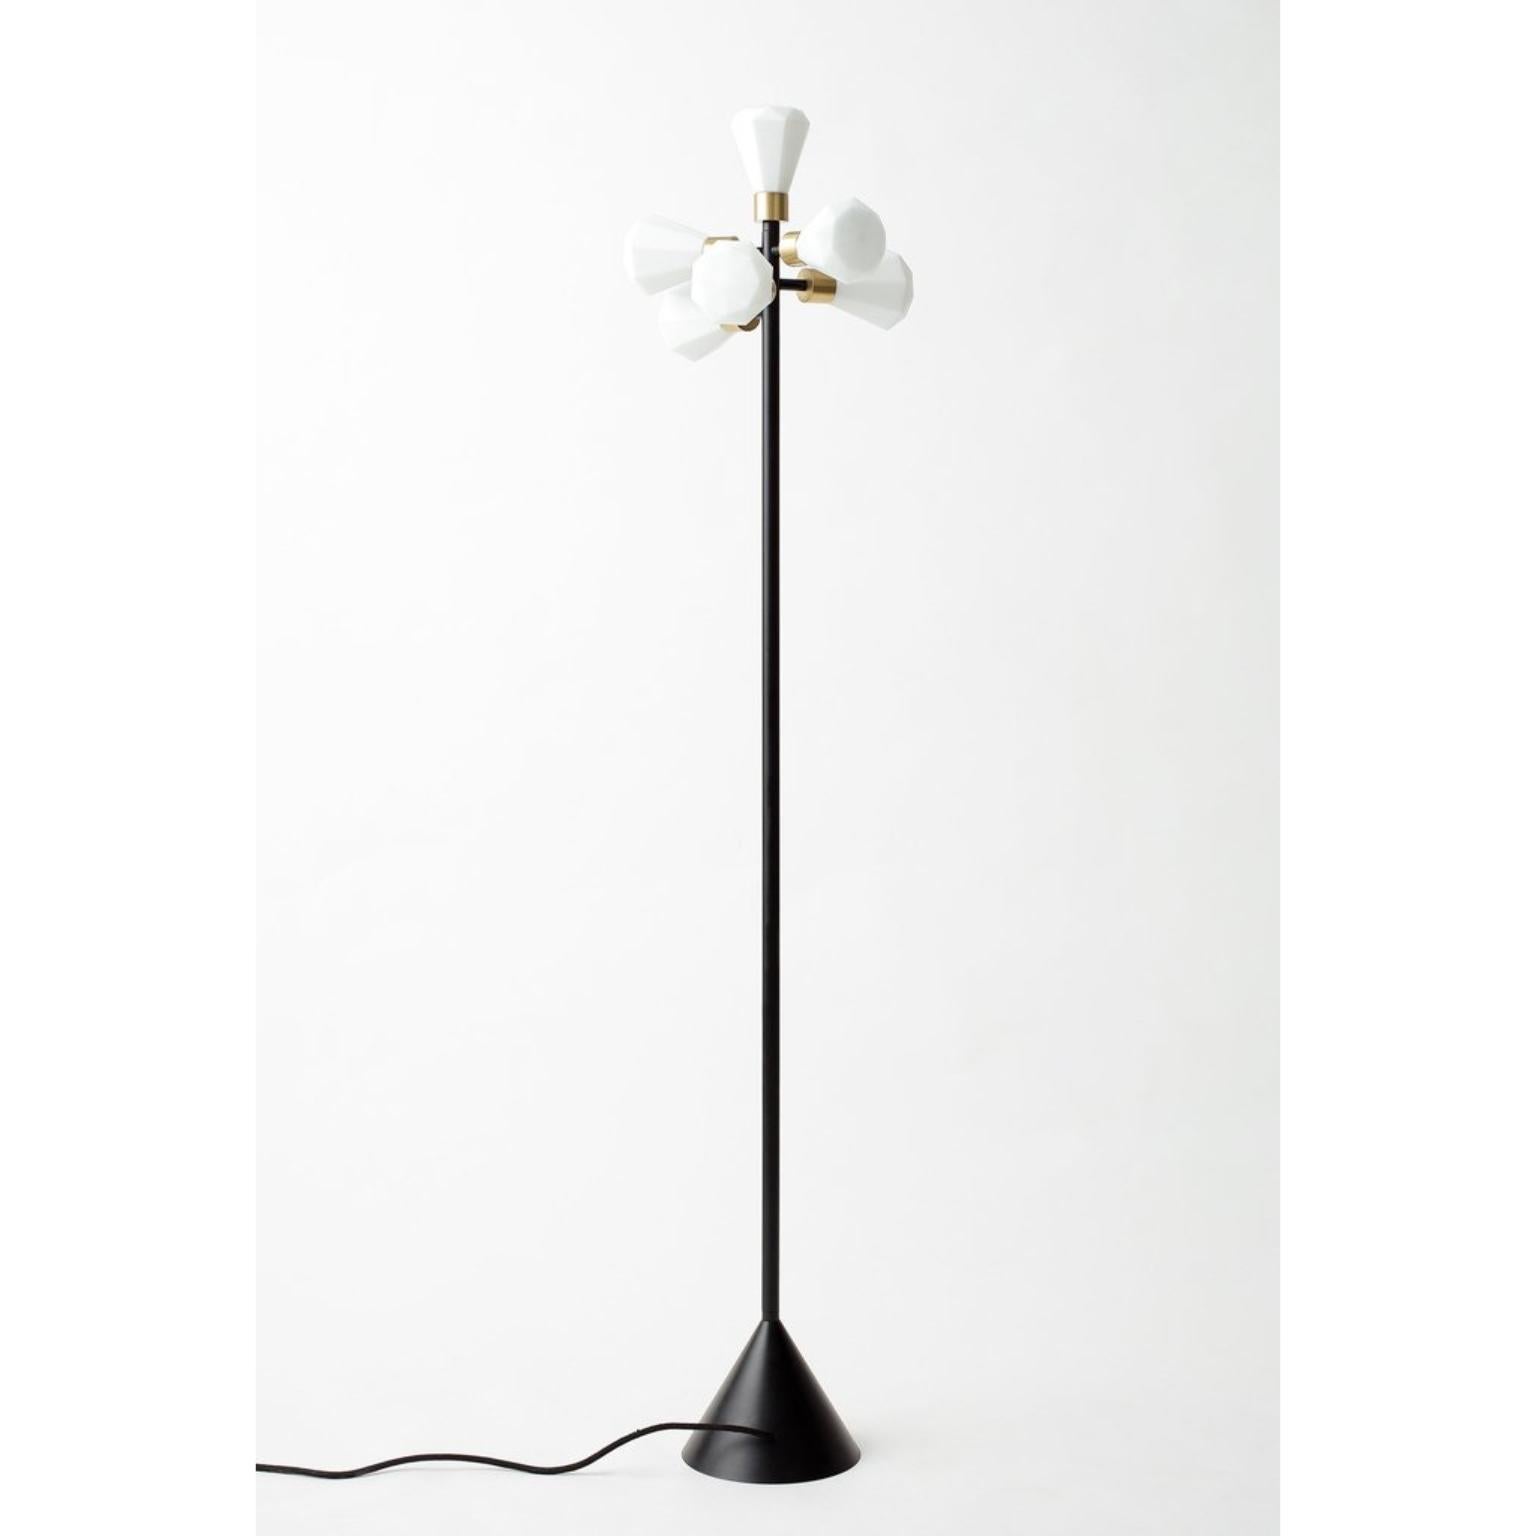 Unique cluster floor lamp by Hatsu
Dimensions: W 30 x H 148 cm 
Materials: Opal glass with powdercoated aluminium, brass details

Hatsu is a design studio based in Mumbai that creates modern lighting that are unique and immediately recognisable. We